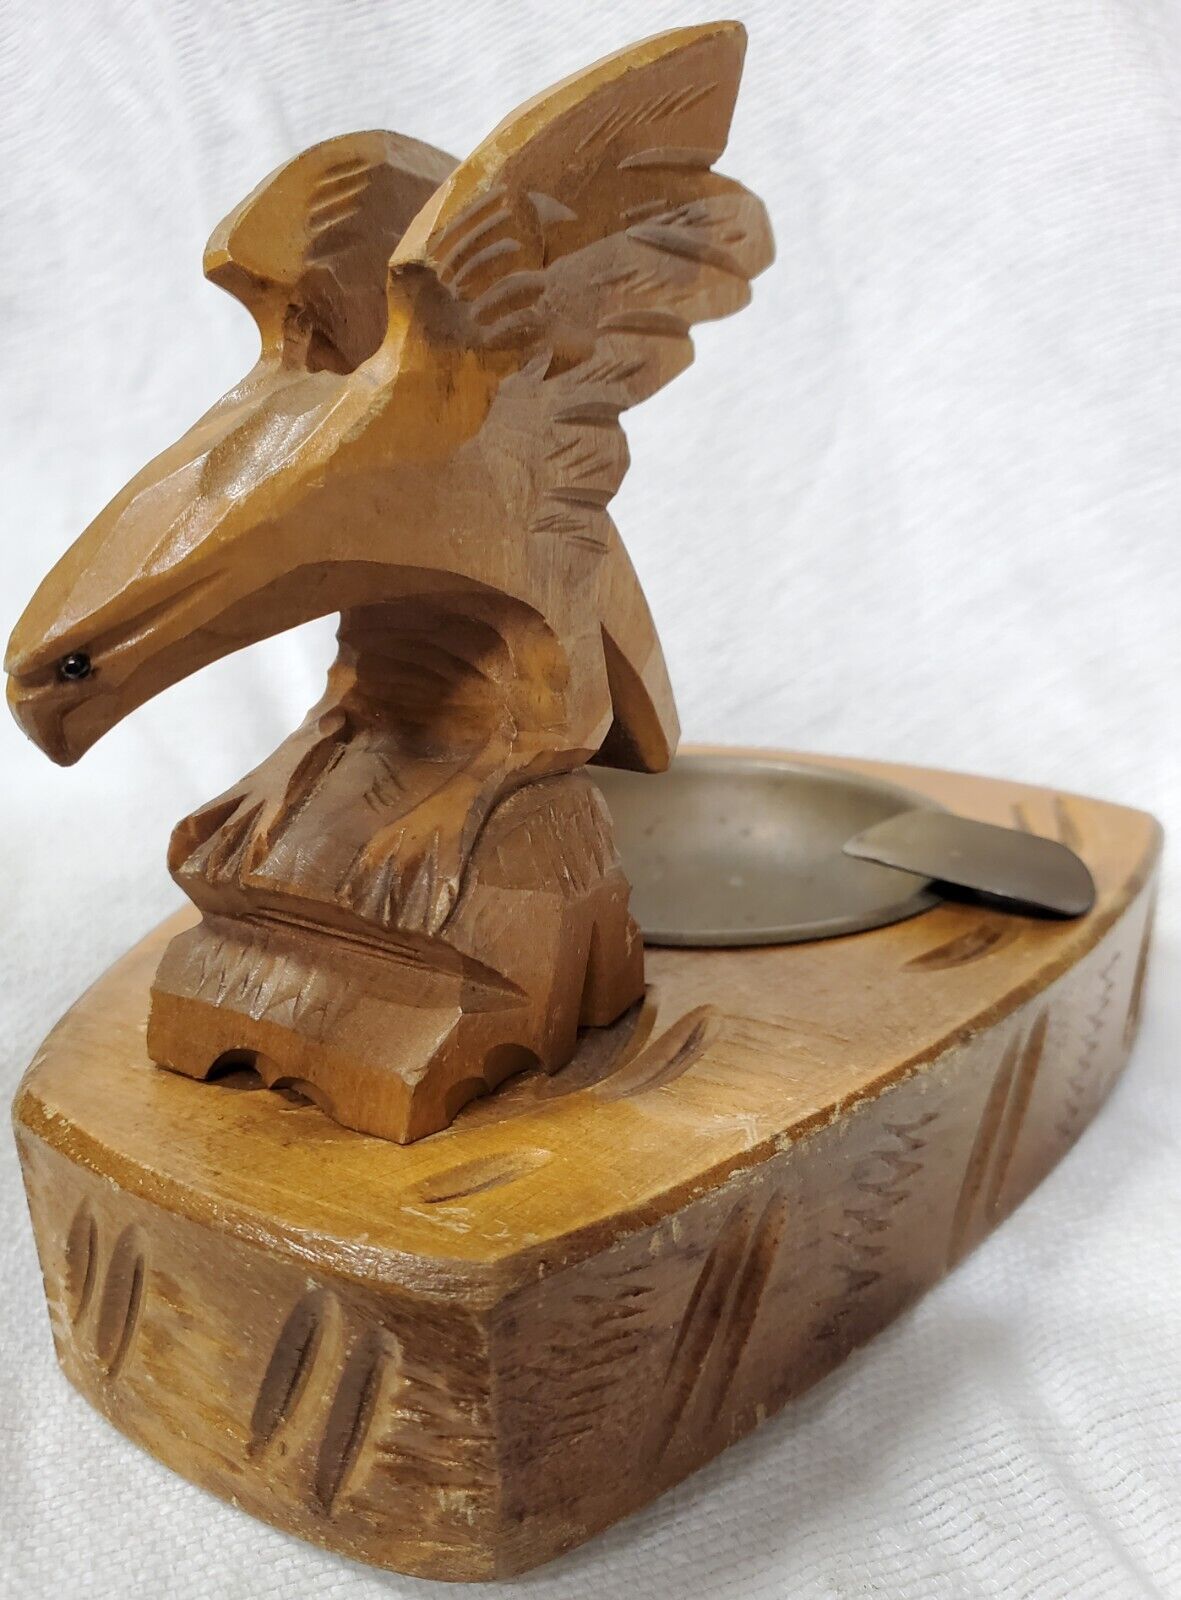 1953 Hand Carved US Post Office Eagle Statue Postal Service Ashtray Collectible